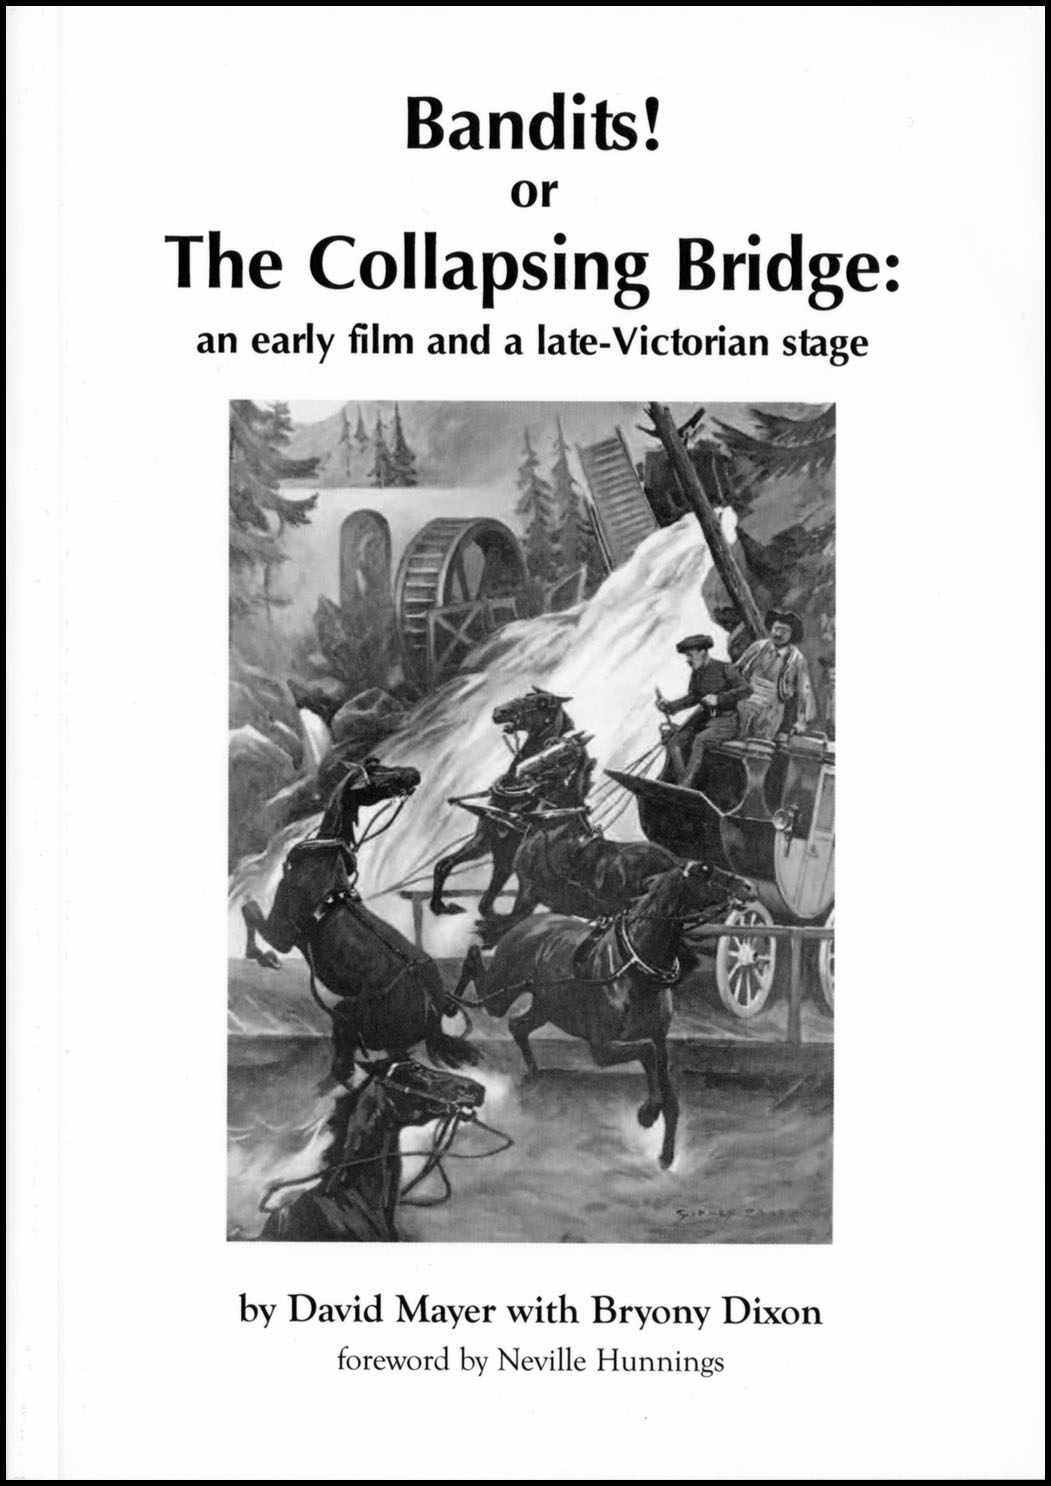 BANDITS! OR THE COLLAPSING BRIDGE by David Mayer with Bryony Dixon